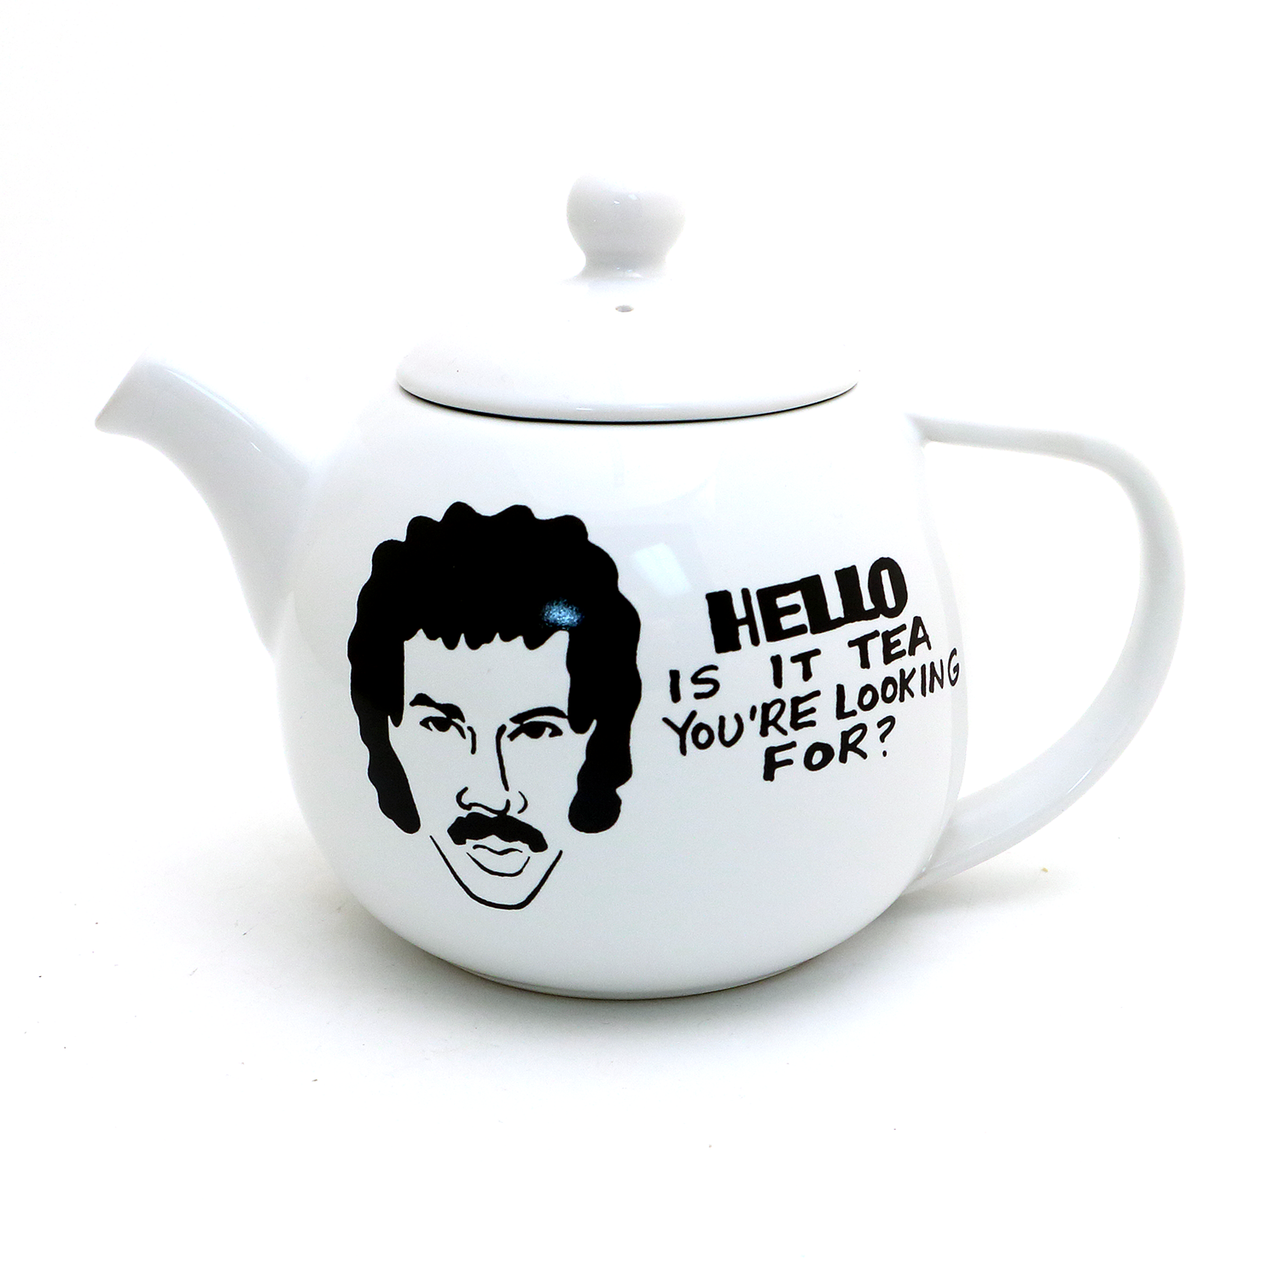 HELLO IS IT TEA YOU'RE LOOKING FOR? SMALL ROUND TEAPOT